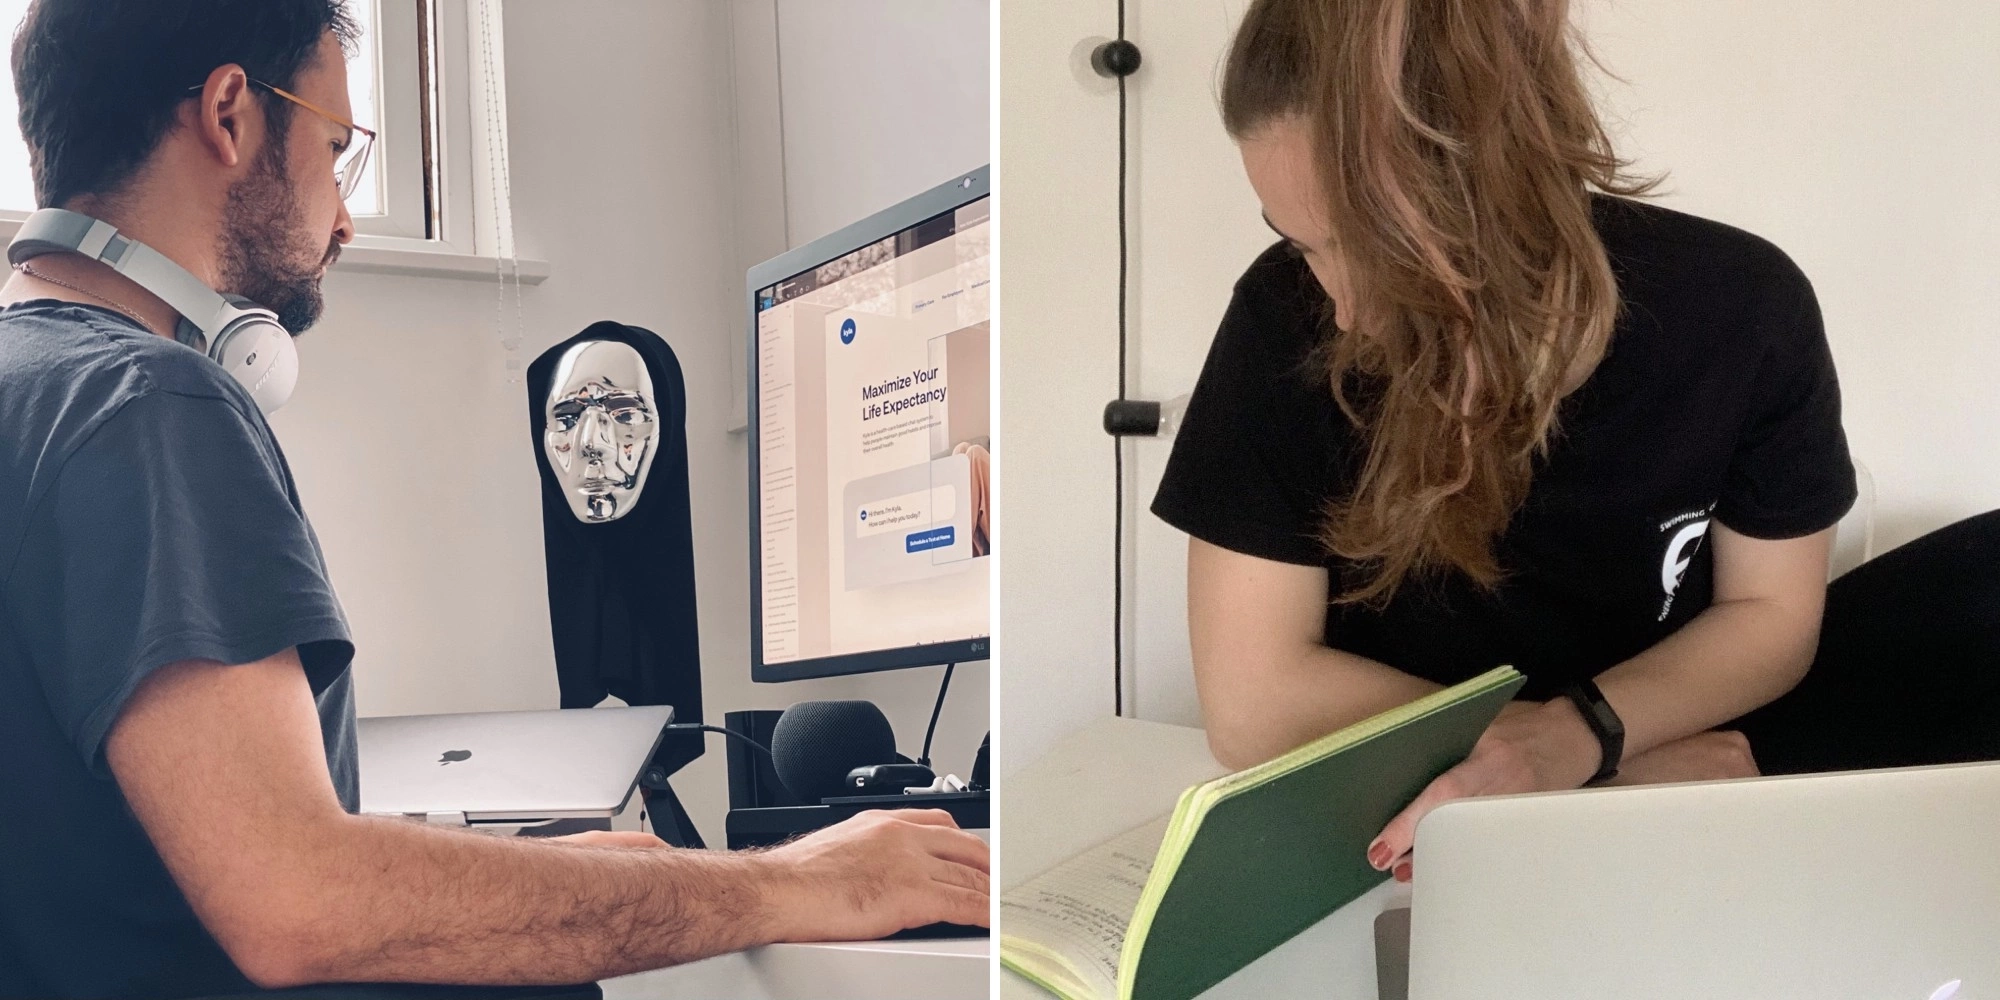 Employees at work. The man in the picture on the left sitting in front of a computer, and woman in the picture on the right looking at her notebook